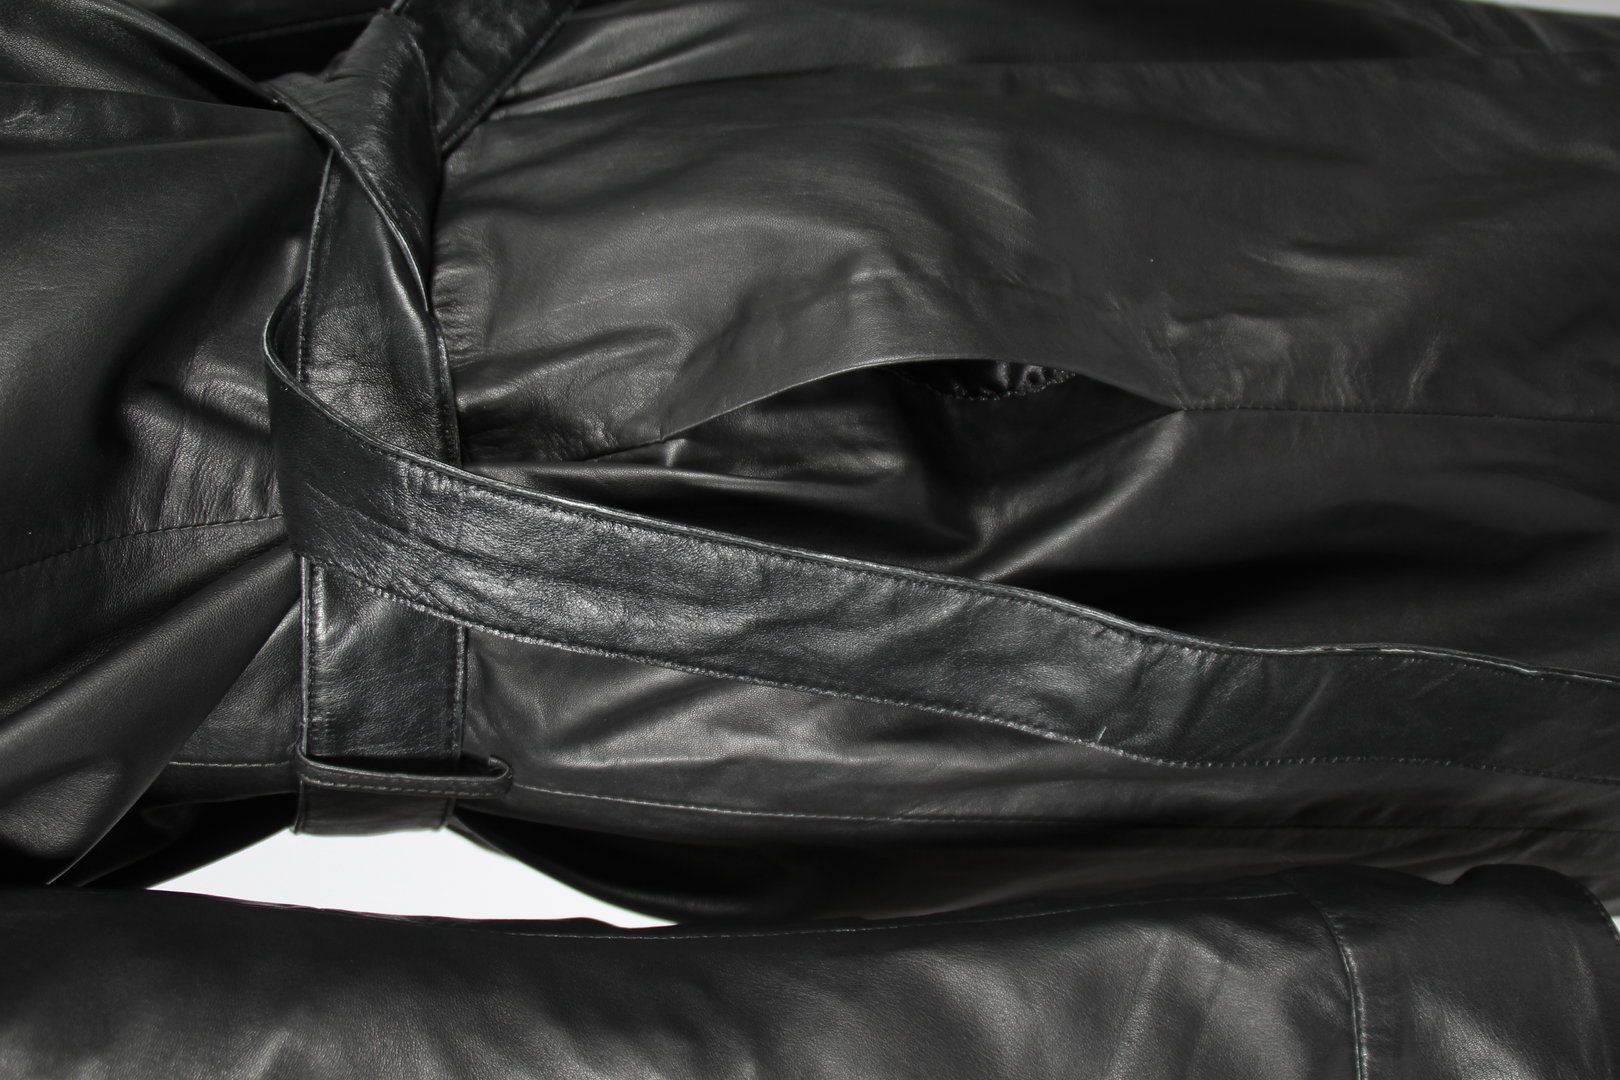 Leather Coat in GENUINE Leather in BLACK with Belt